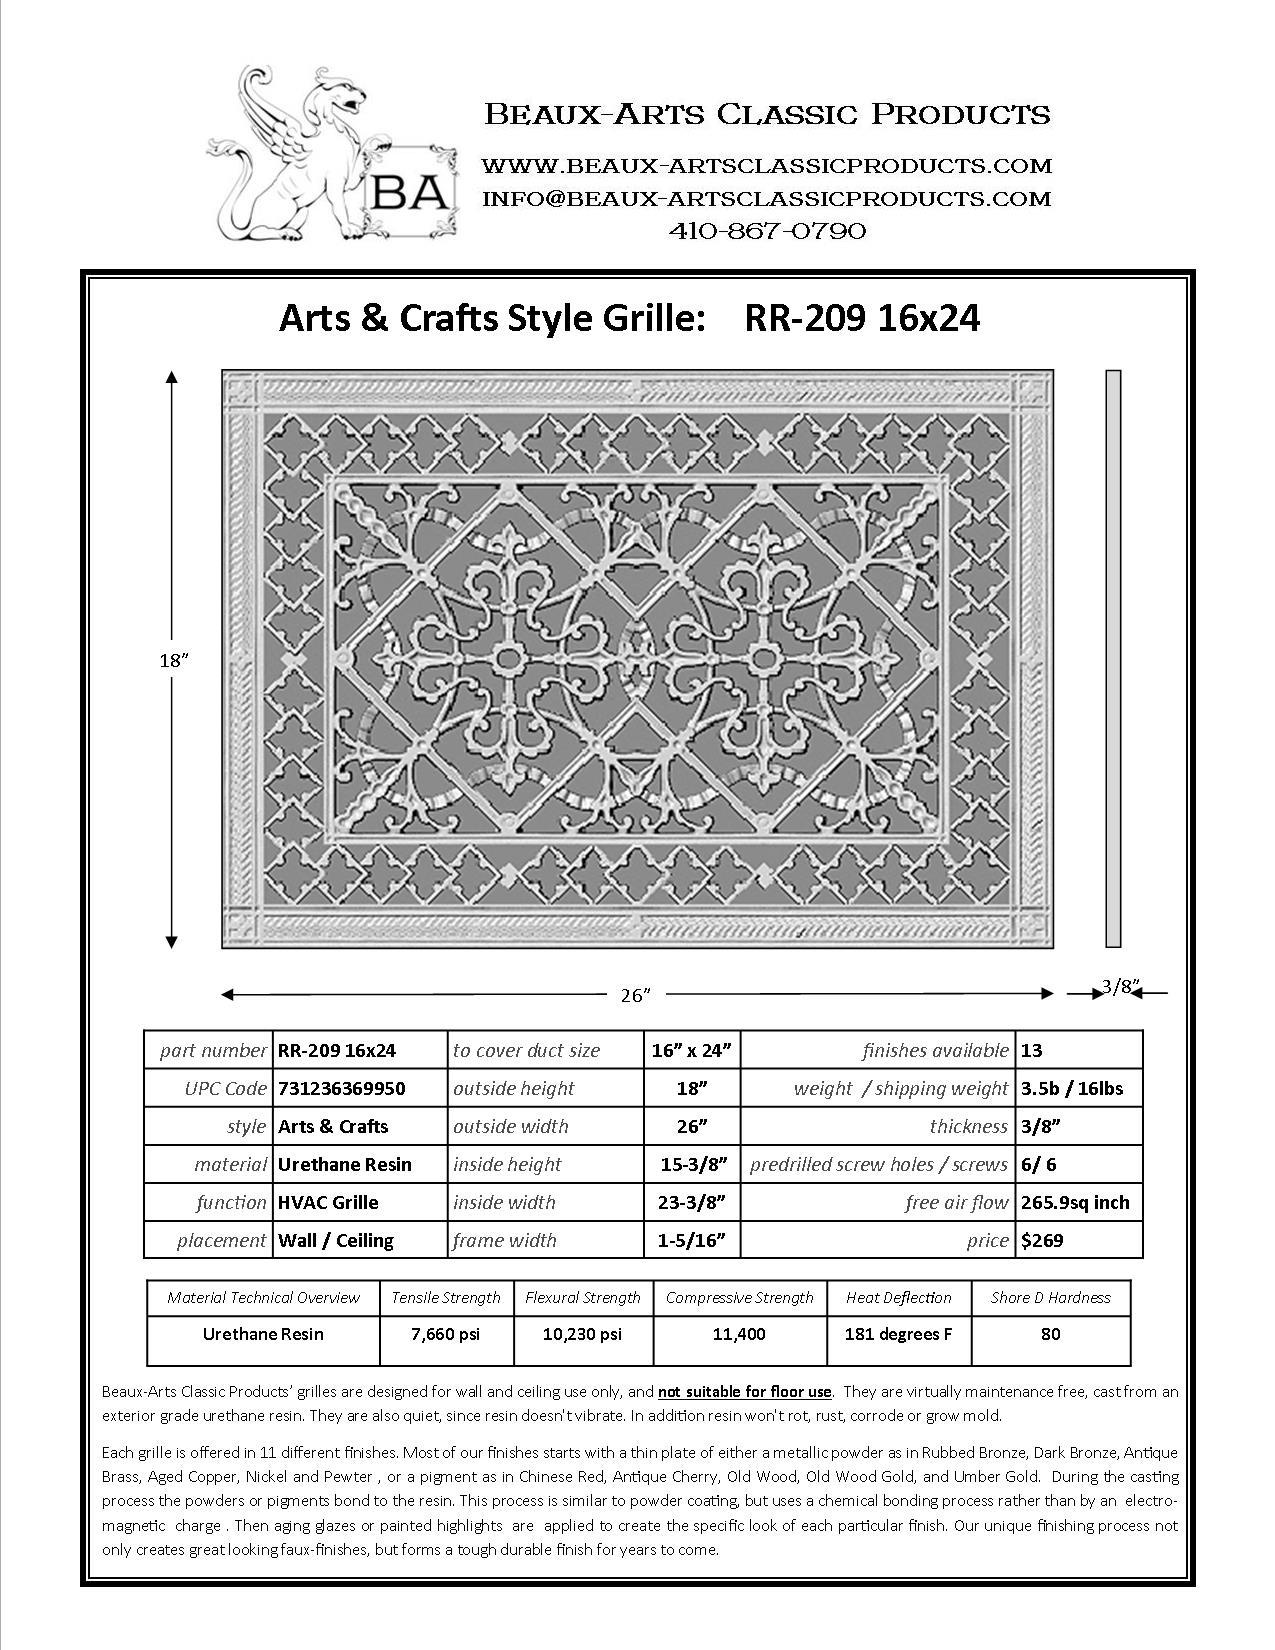 Cabinet Door Grille Spec Sheet Craftsman Style Arts and Crafts 16" x 24"